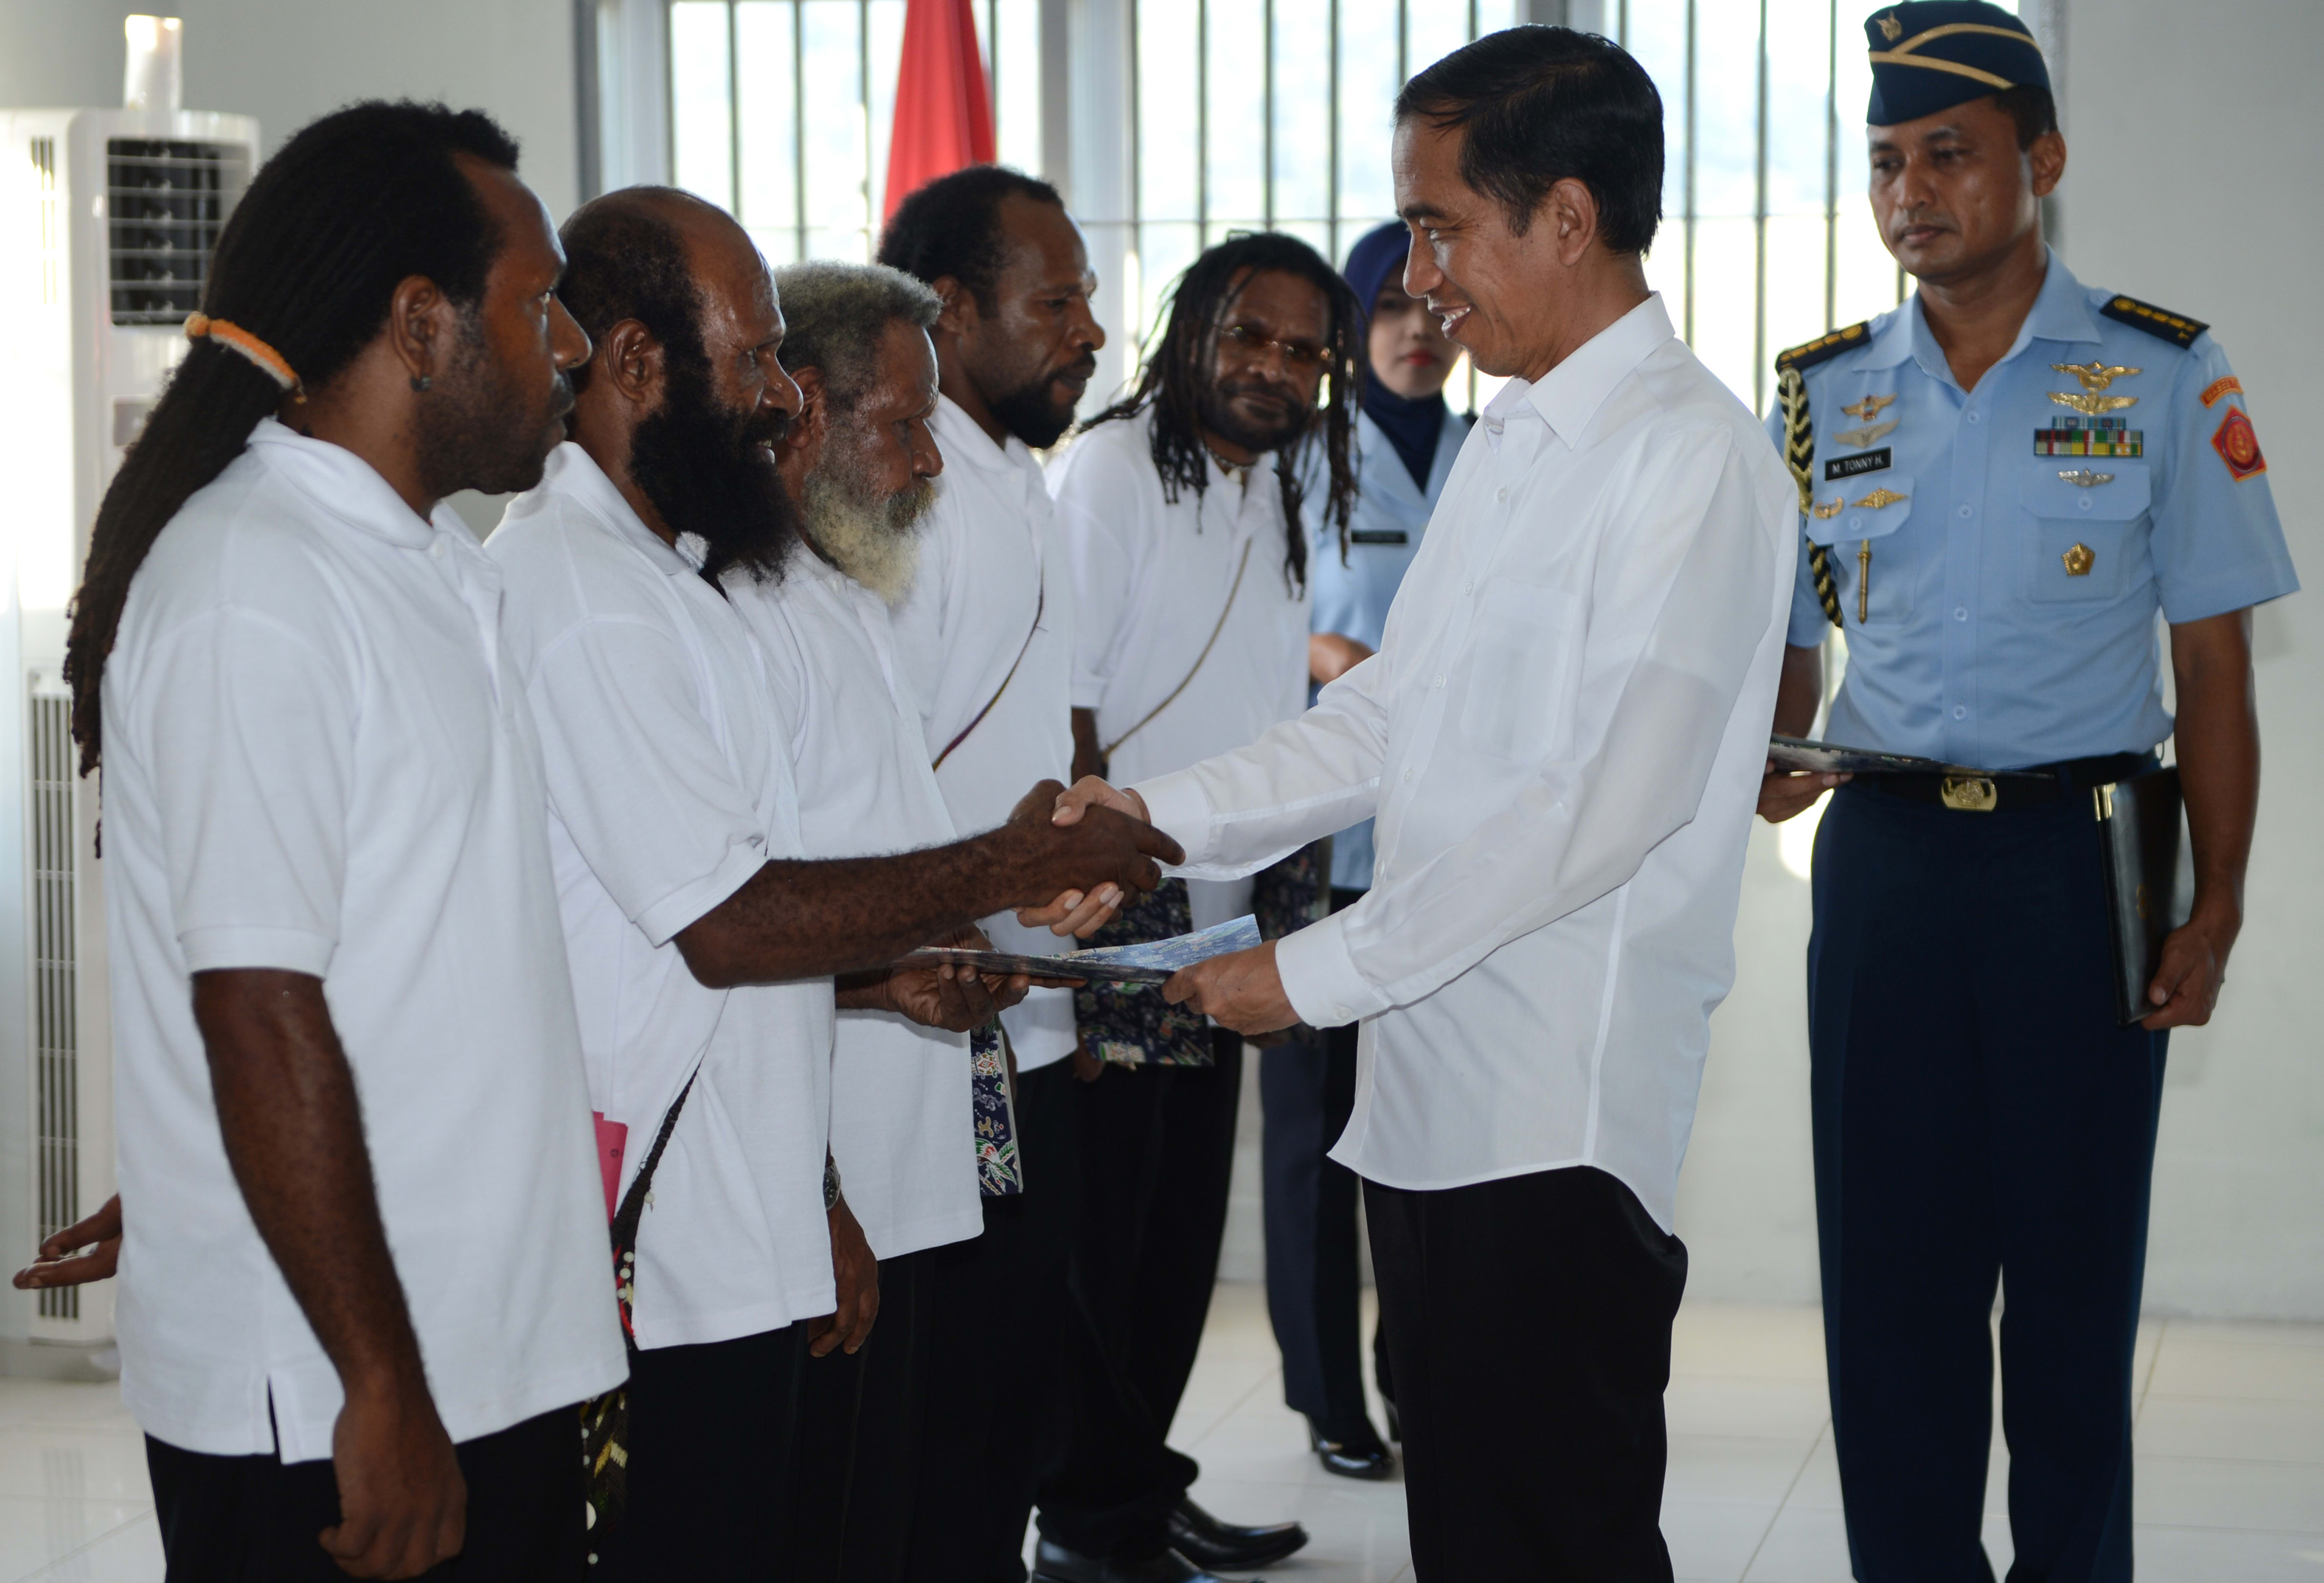 Indonesia's President Joko Widodo shakes hands with freed Papuan political prisoner Kimanus Wenda (2nd L) while four others Jefrai Murib (L) Apotnalogolik Lokobal (3rd L) Numbungga Telenggen (4th L) and Linus Hiluka (3rd R) during a ceremony at Abepura prison in Papua Province.